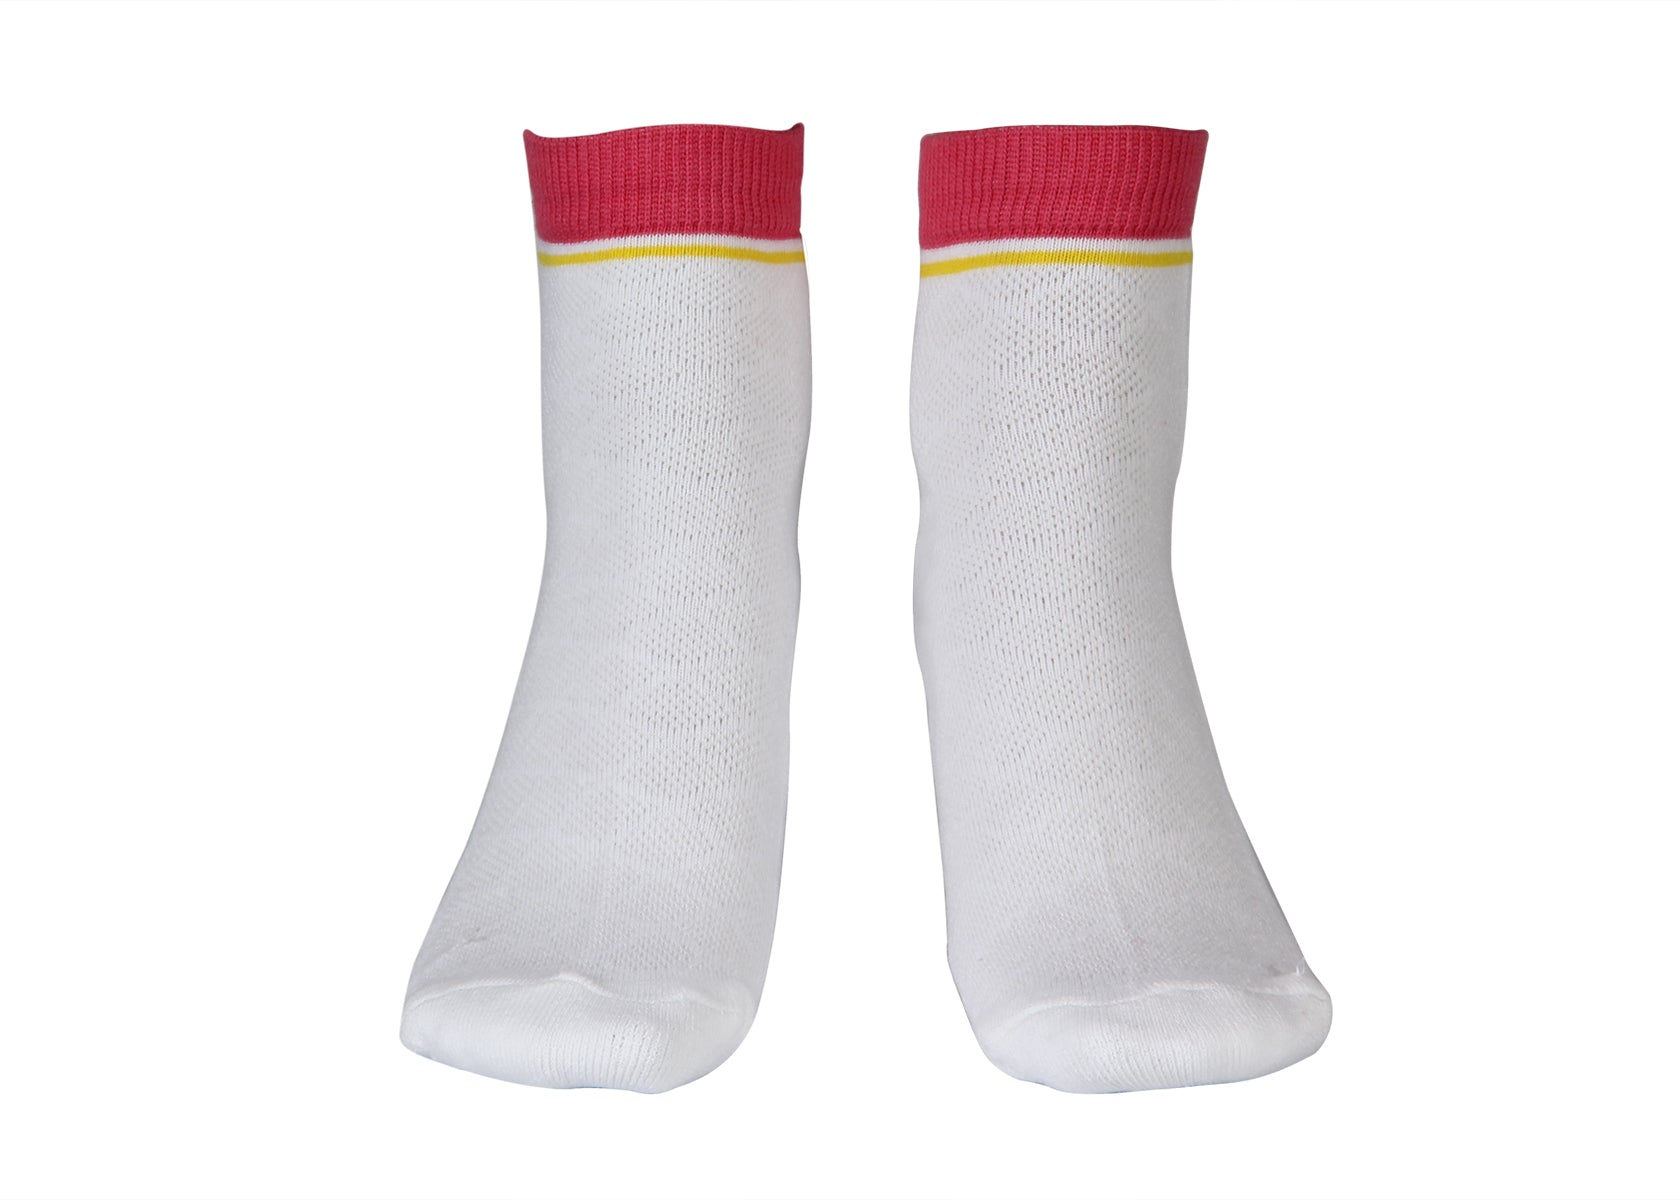 Diti Women's Ankle Length Multicolor Cotton Socks-Pack of 3